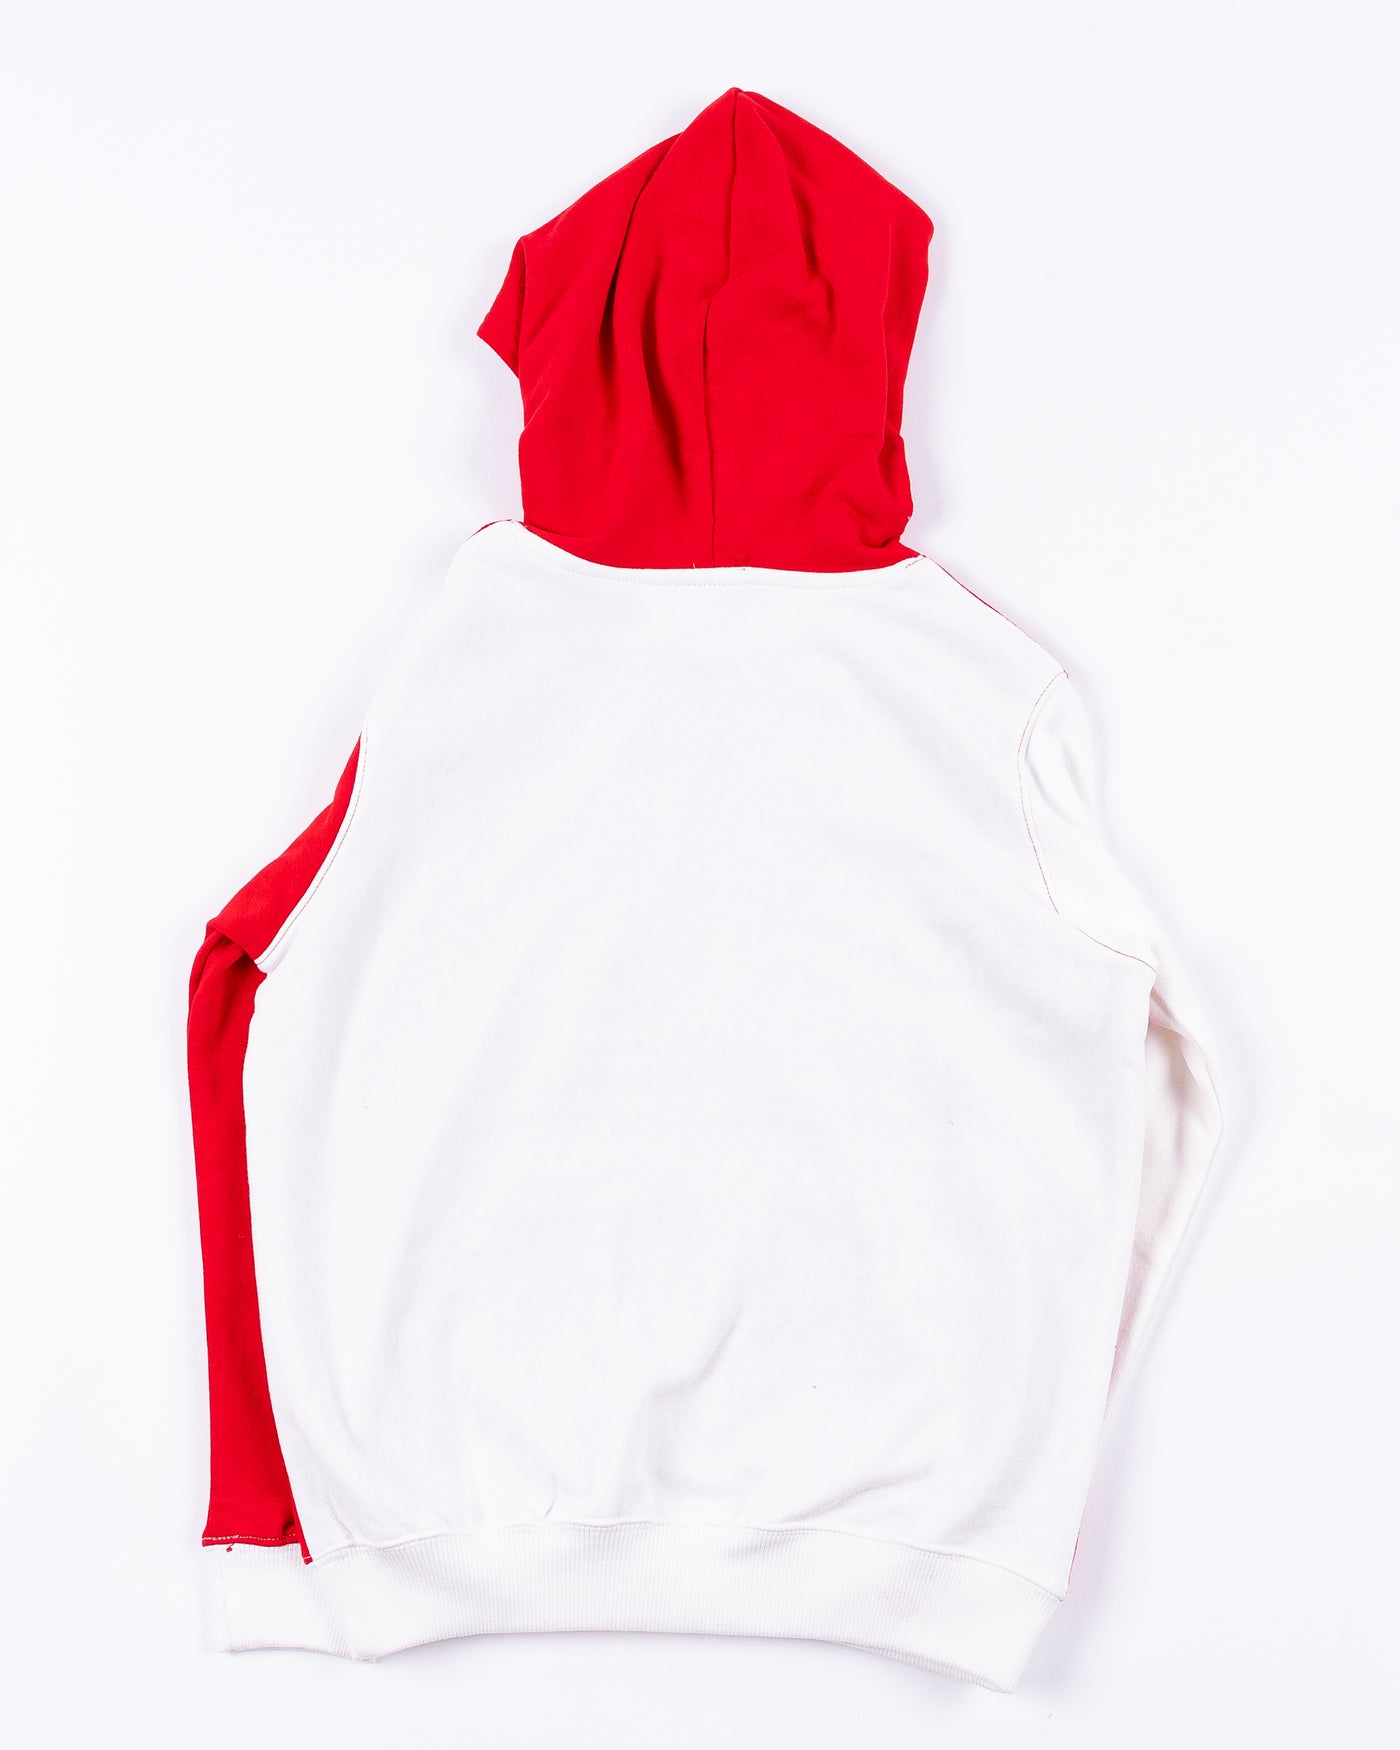 youth Champion hoodie with color block red and white design with Chicago Blackhawks wordmark on right sleeve and primary logo across chess - back lay flat